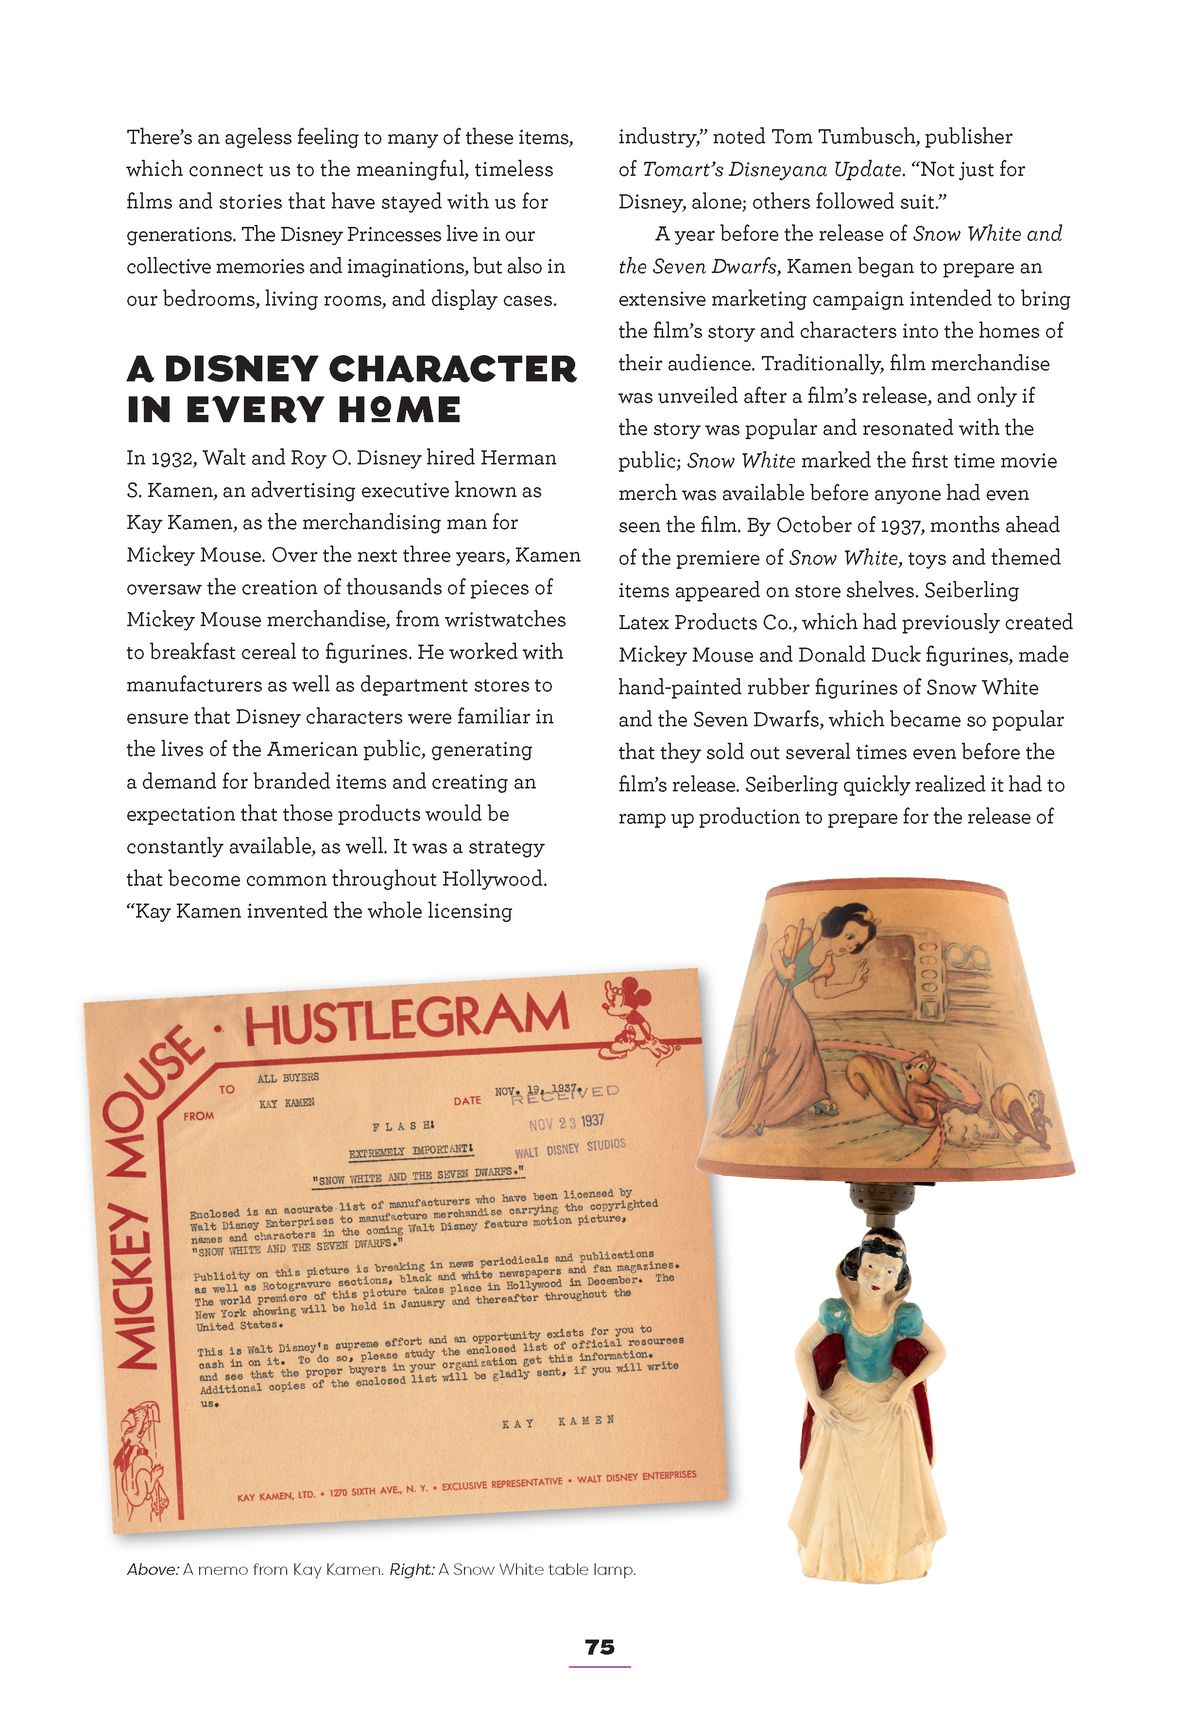 a page of Disney Princess: Beyond the Tiara; it mostly features text, but there is also a telegram describing Disney’s merchandising efforts with Snow White and a Snow White shaped lamp